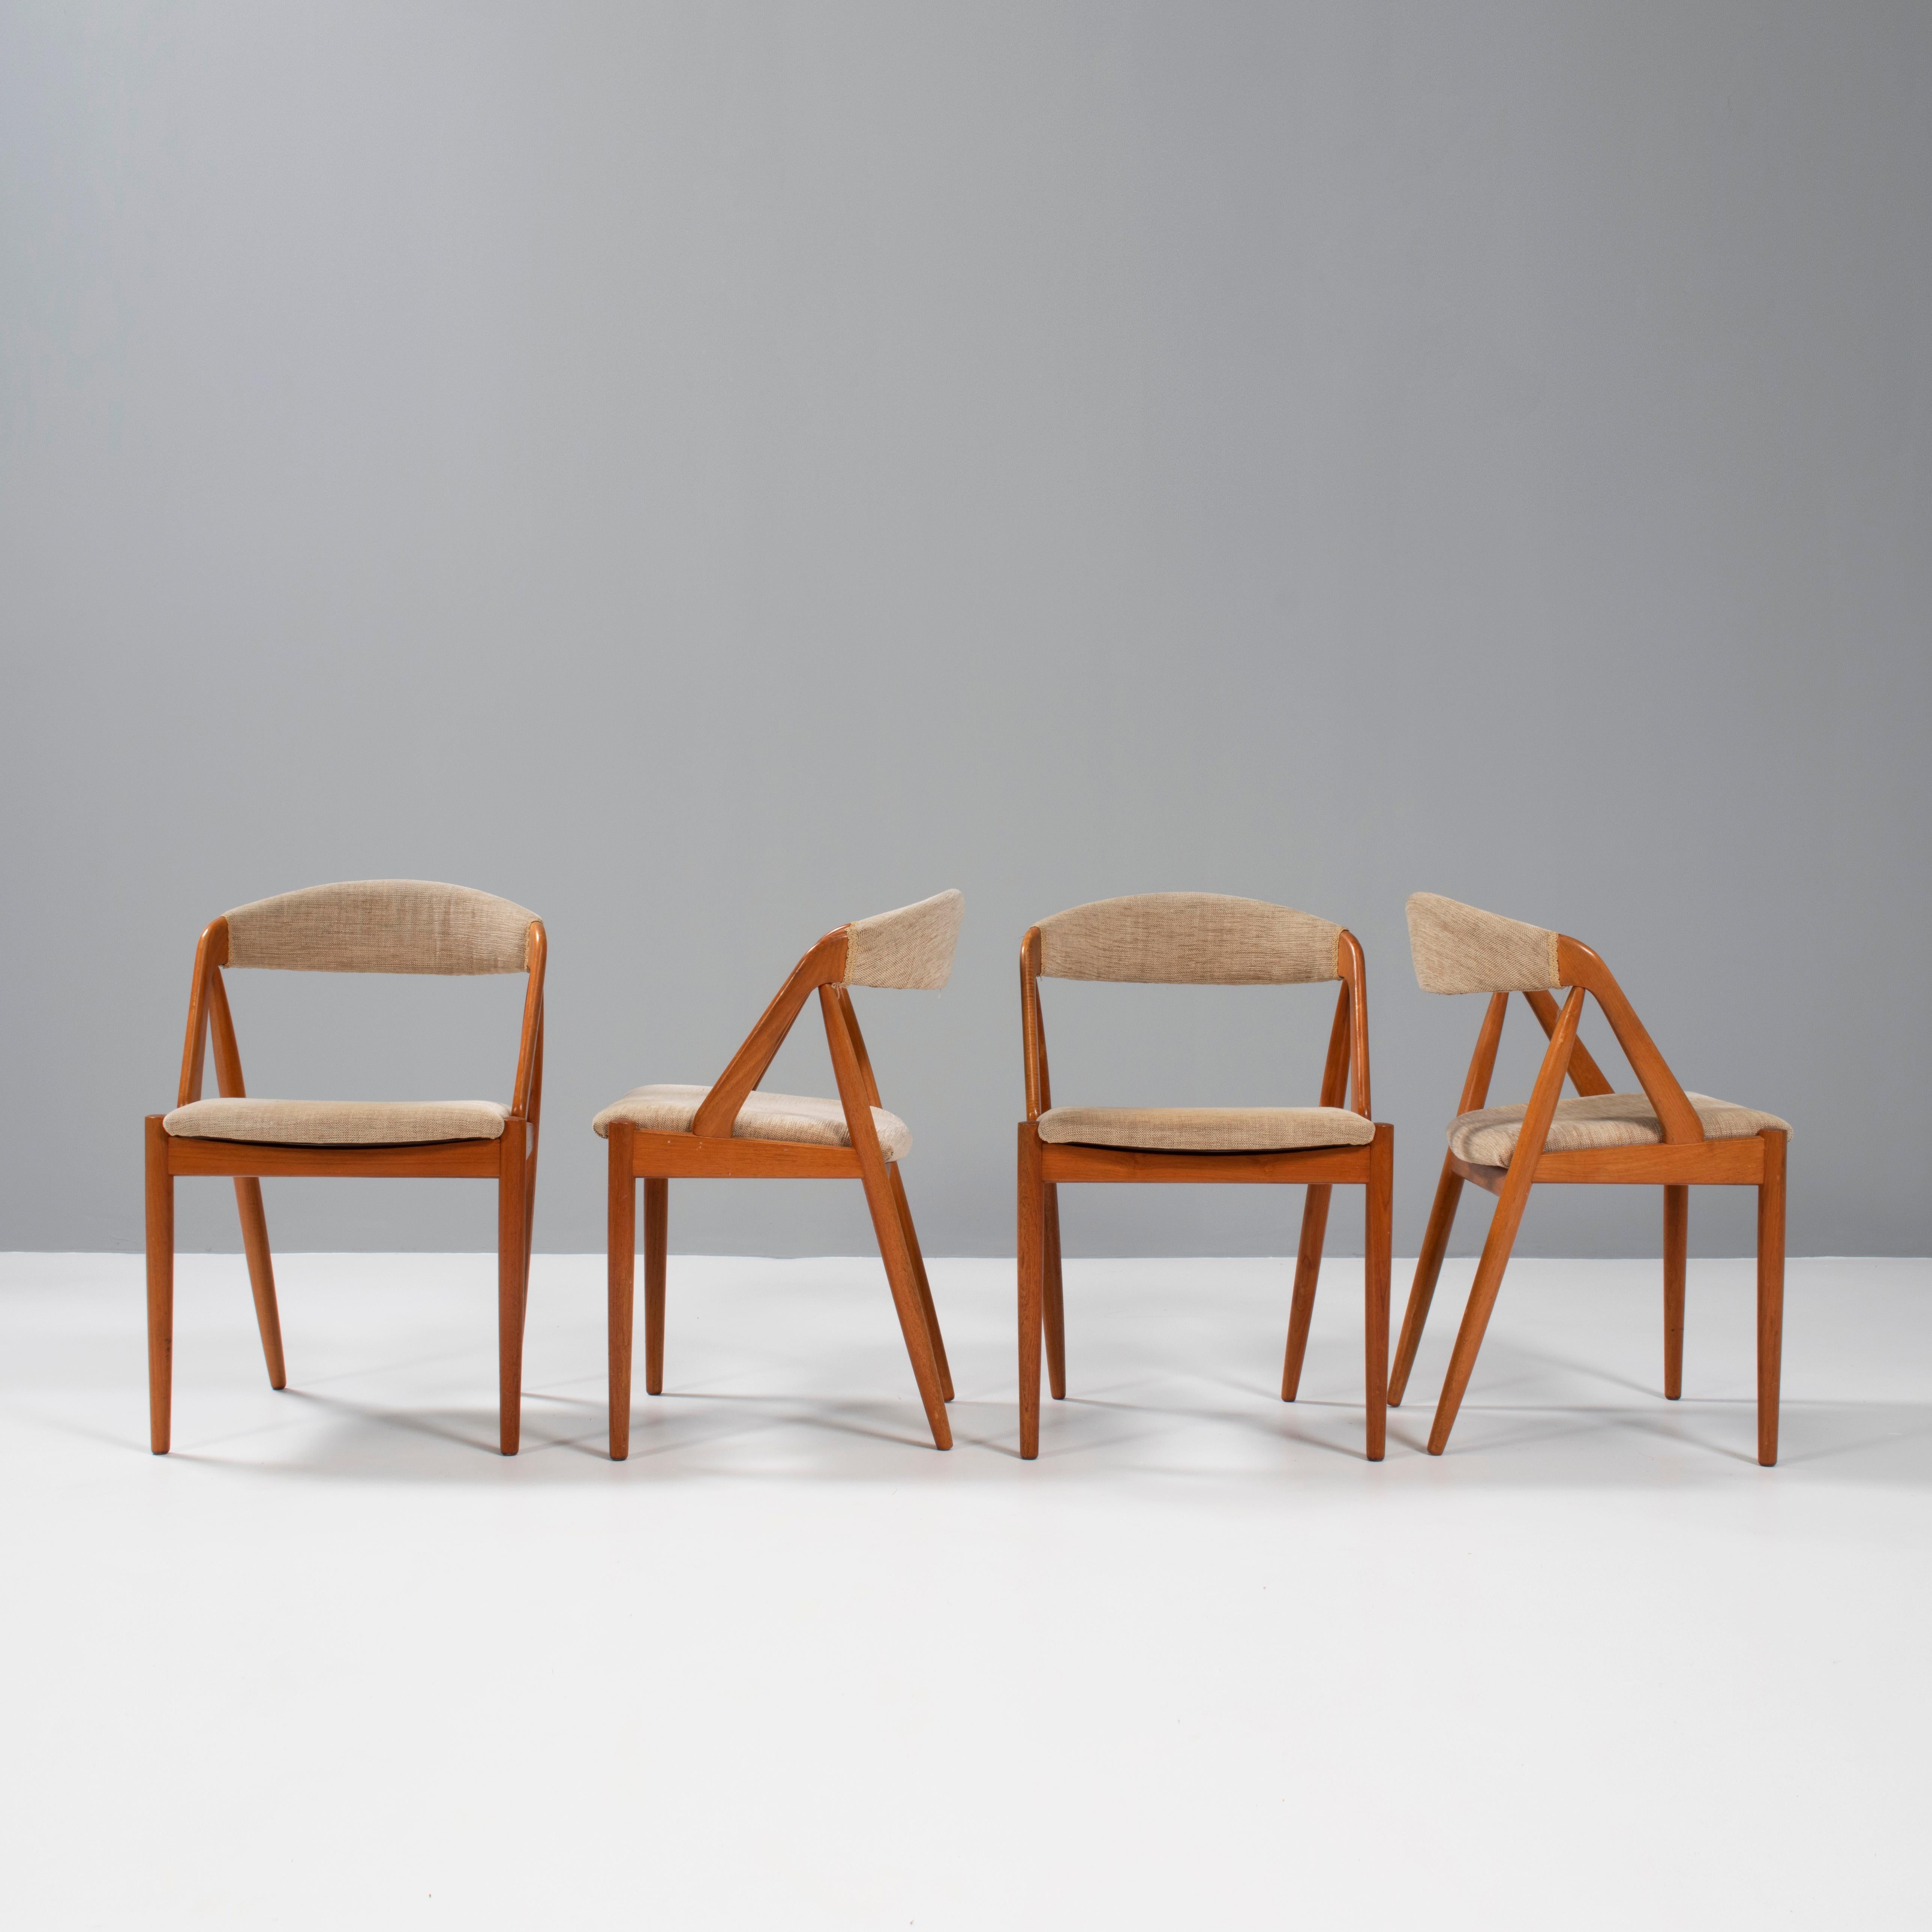 Designed by Kai Kristiansen for Schou Andersen the Model 31 dining chair is a fantastic example of classic Danish Mid-Century design.

Constructed from teak, the chairs have a classic silhouette combining a curved backrest with angled legs and arm